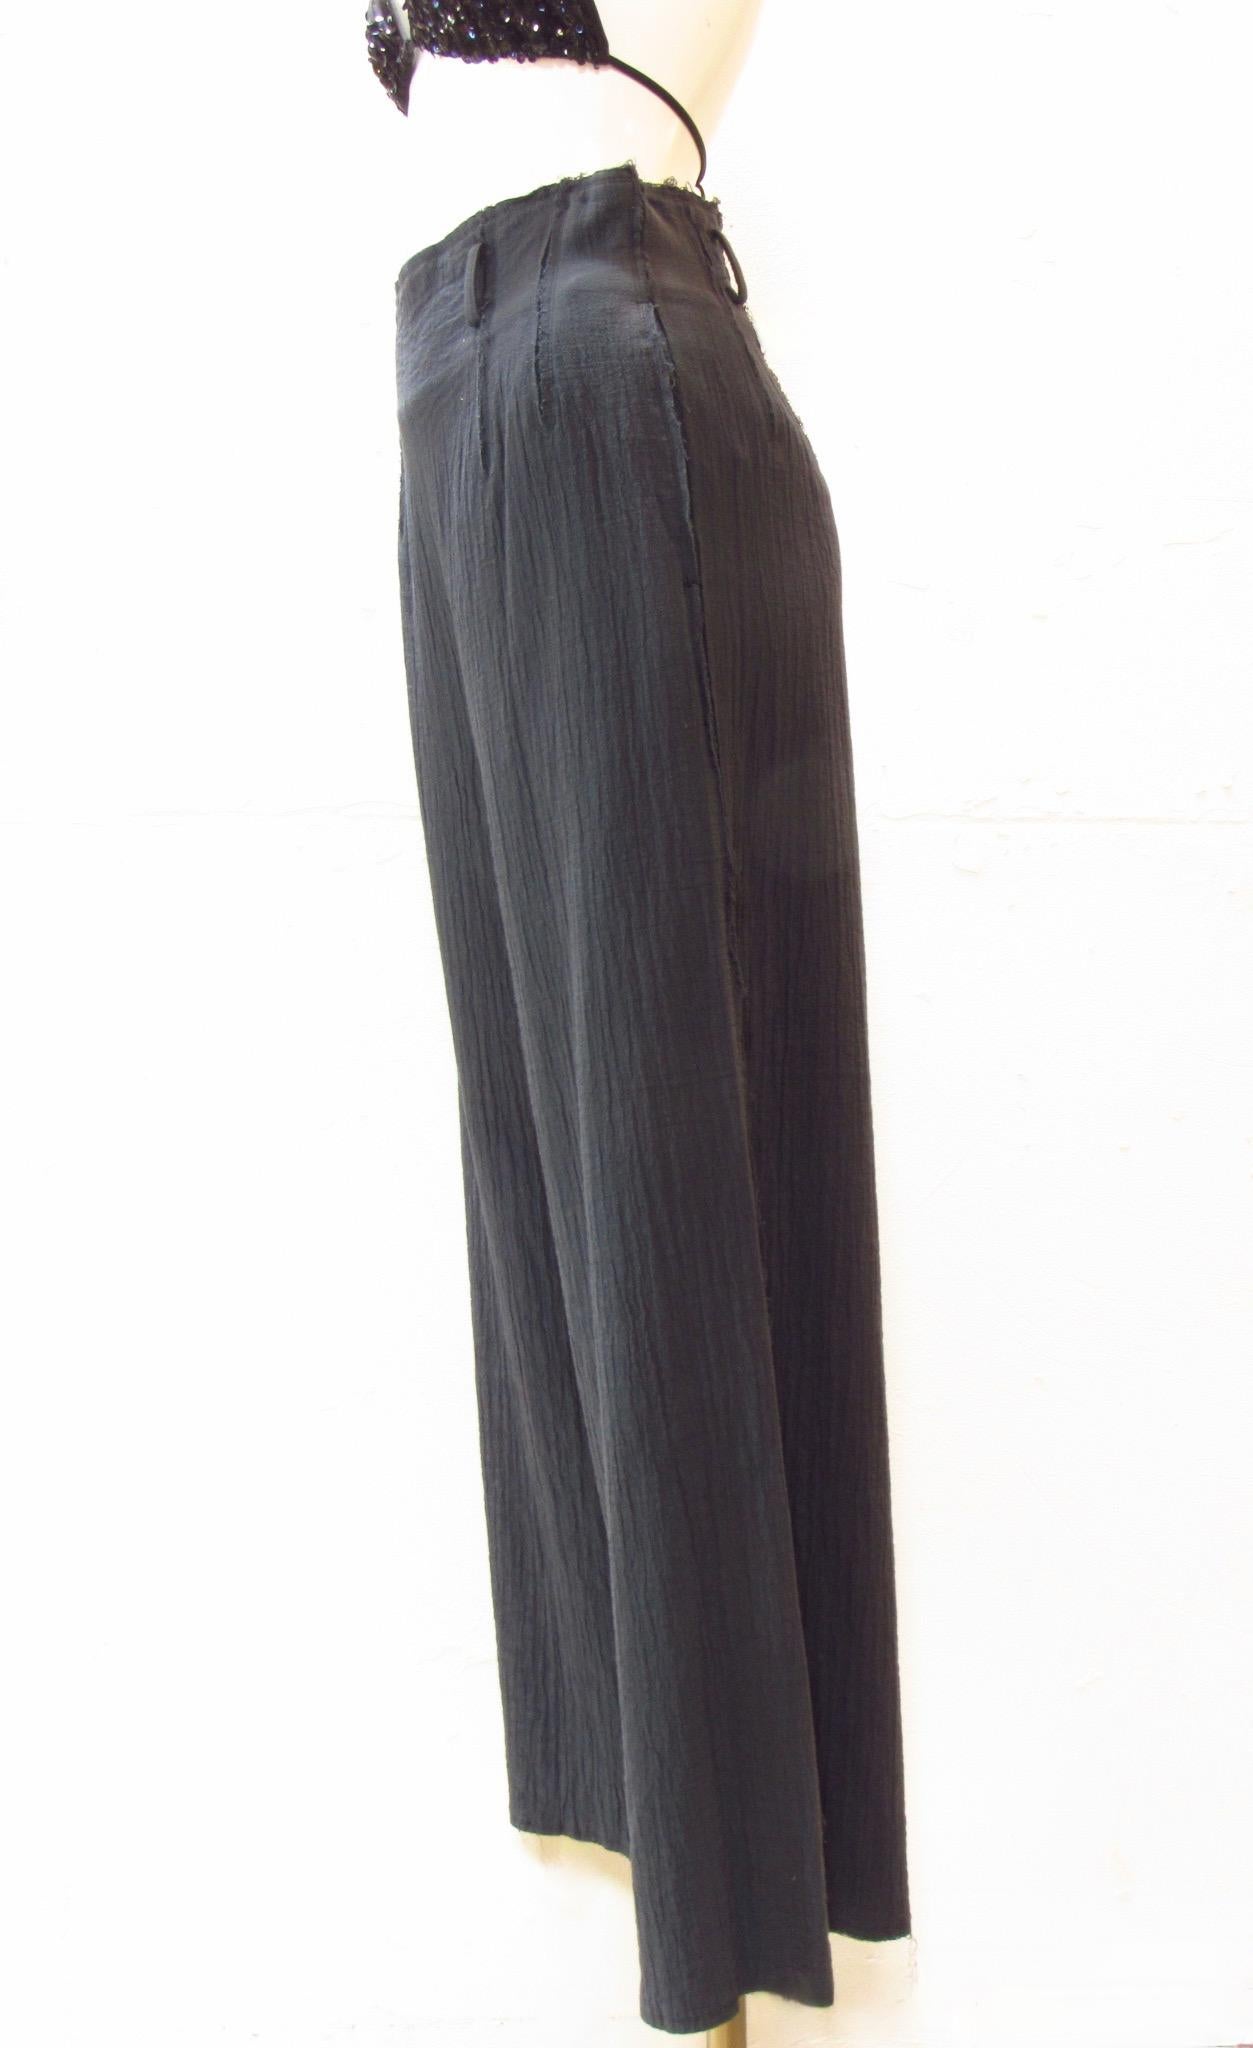  High-Waisted Matsuda cotton petrol Pant In New Condition For Sale In Laguna Beach, CA